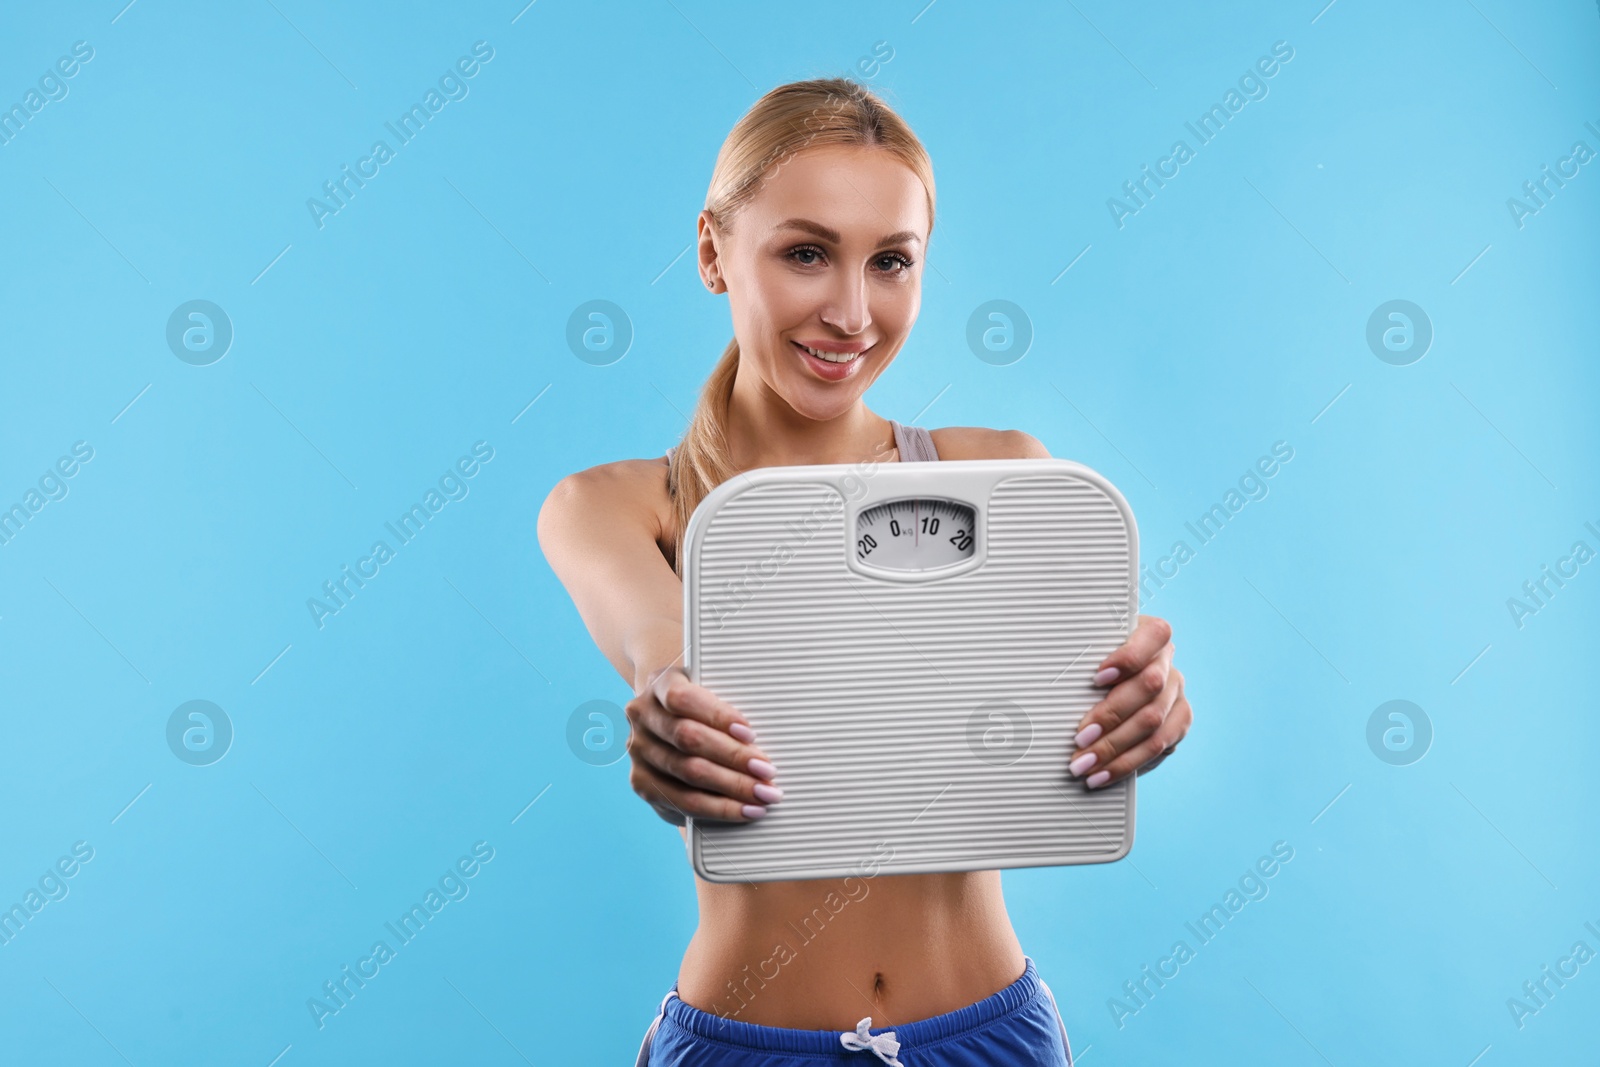 Photo of Happy woman with floor scale on light blue background